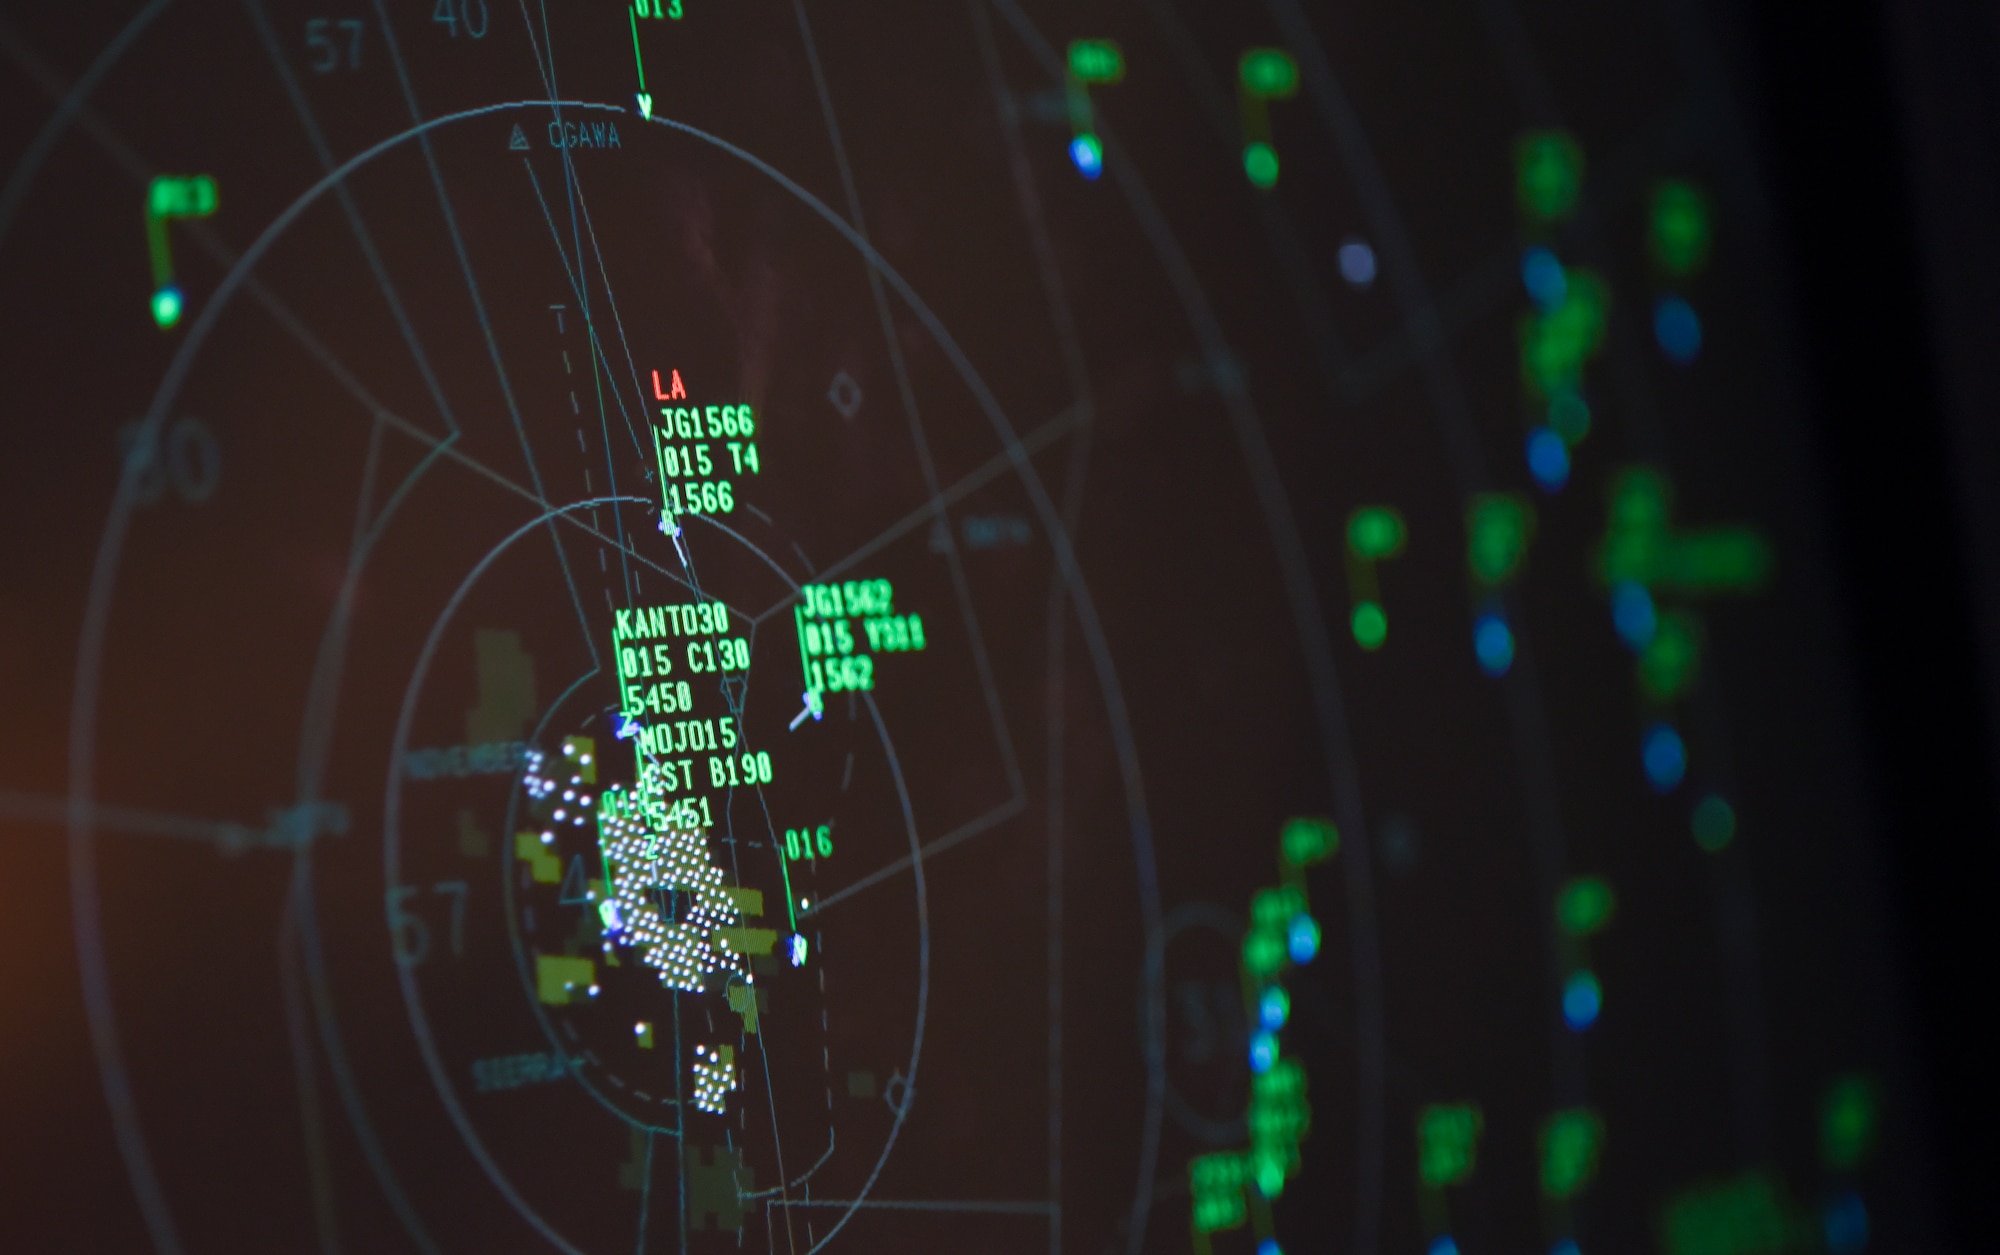 A computer monitor in the radar approach control section of the air traffic control tower at Yokota Air Base, Japan, displays all the incoming and outgoing aircraft near Yokota and surrounding areas May 8, 2015. From this section in the control tower, RAPCON Airmen are able to monitor aircraft from ground level to altitudes of 23,000 feet. (U.S. Air Force photo by Senior Airman Michael Washburn/Released)